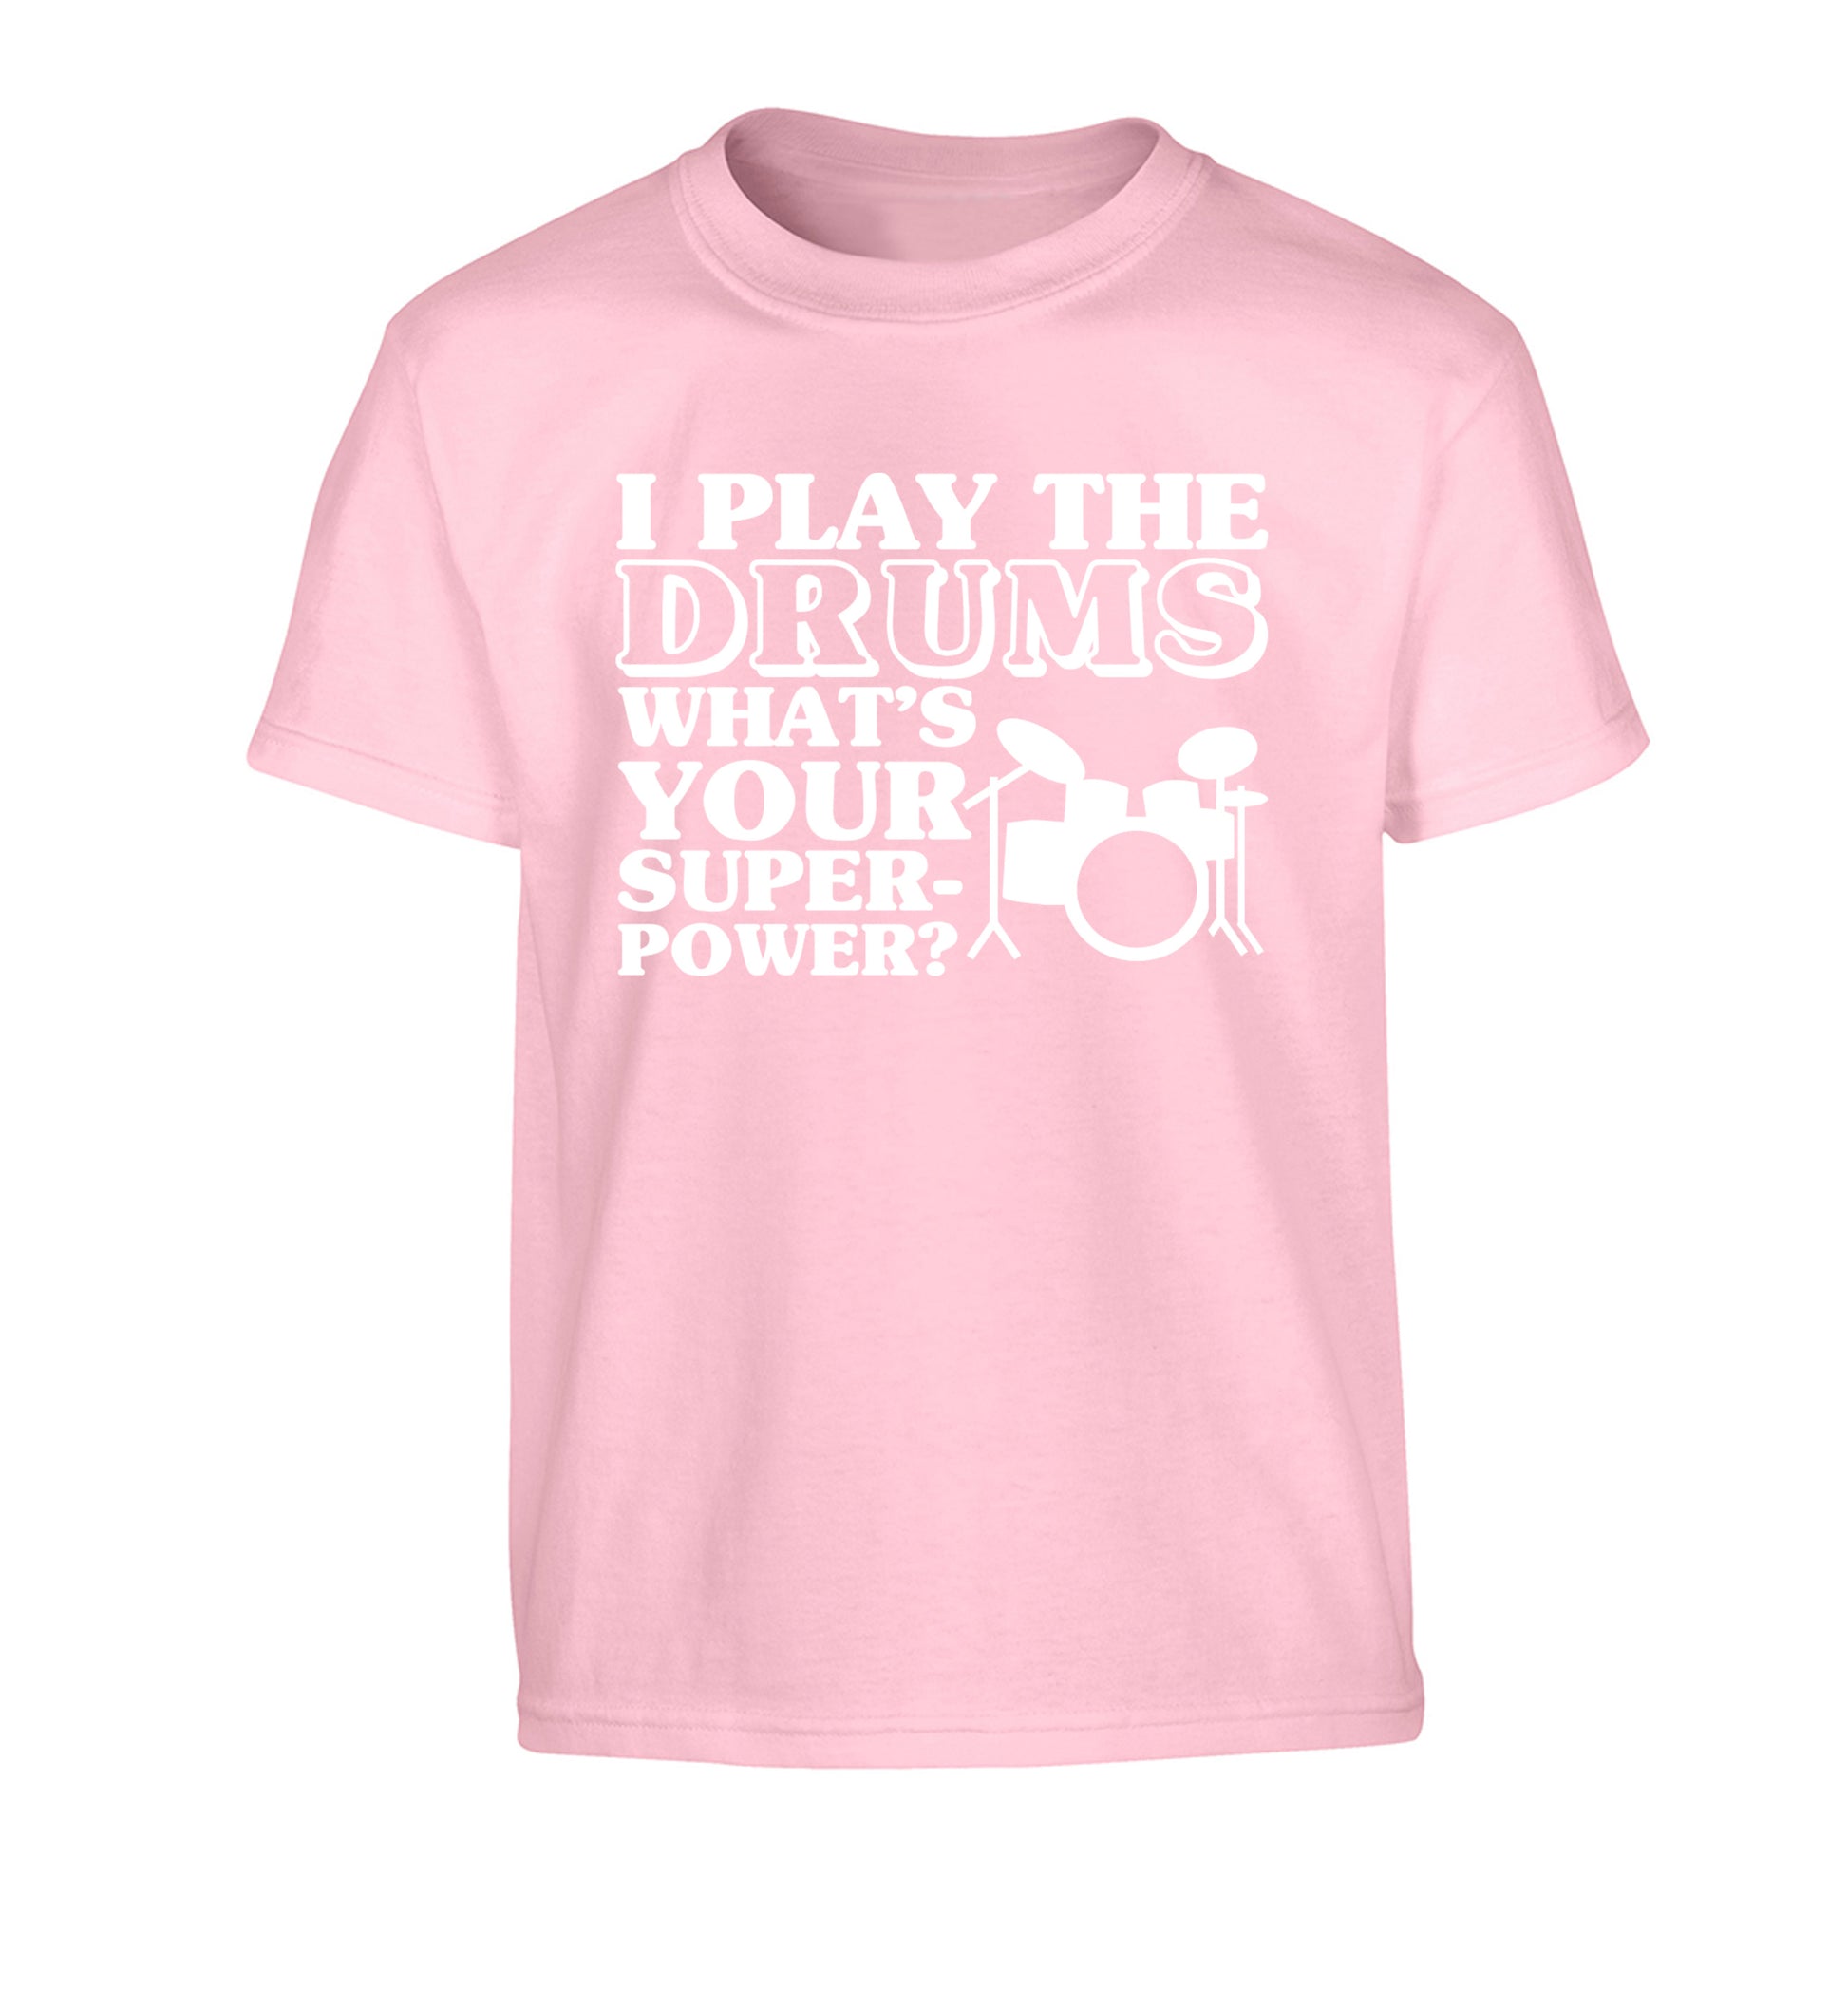 I play the drums what's your superpower? Children's light pink Tshirt 12-14 Years